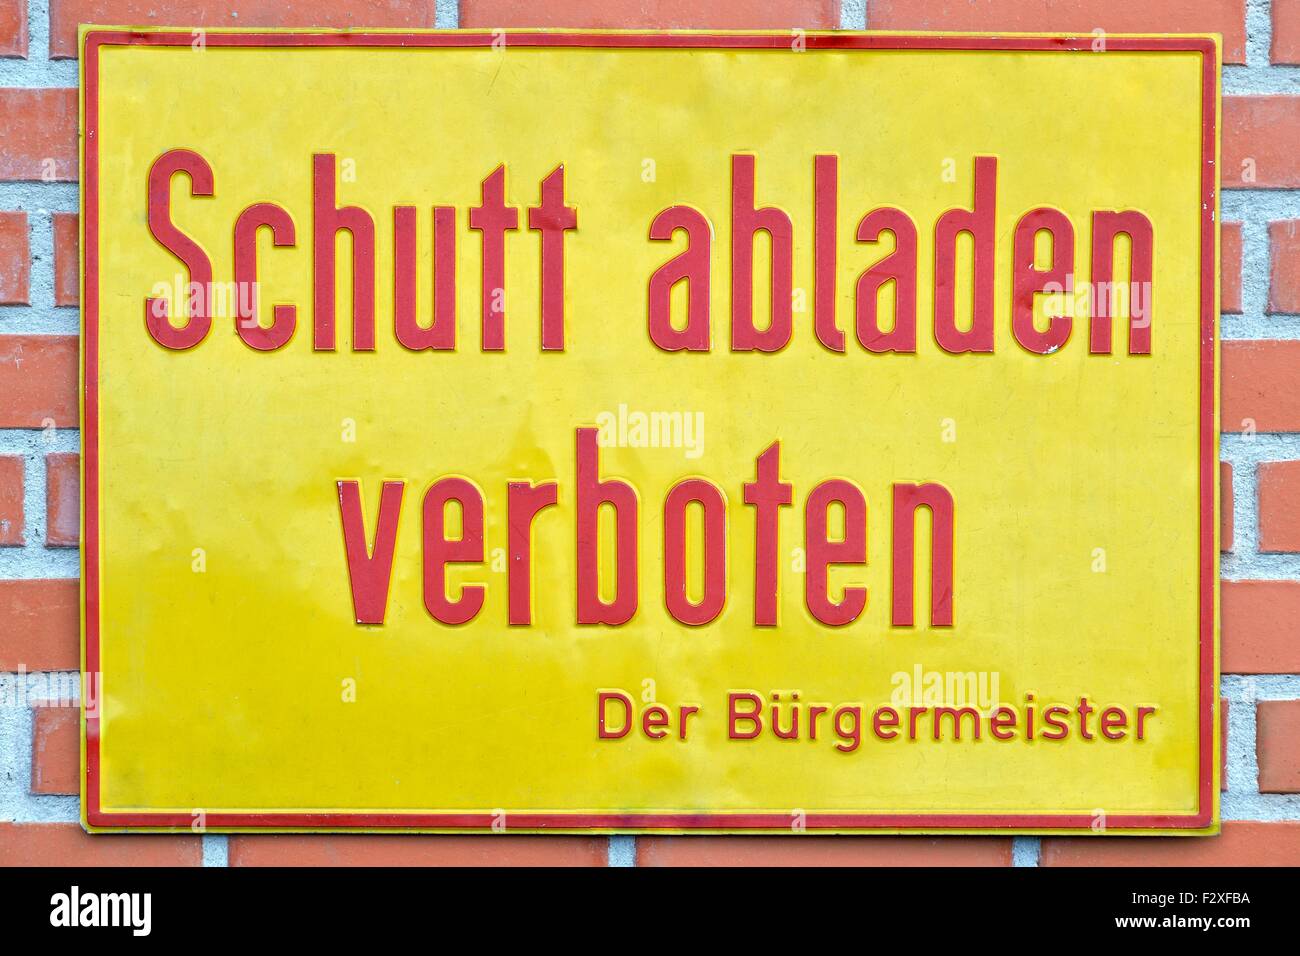 Old sign, unloading rubble prohibited, in German, Germany Stock Photo